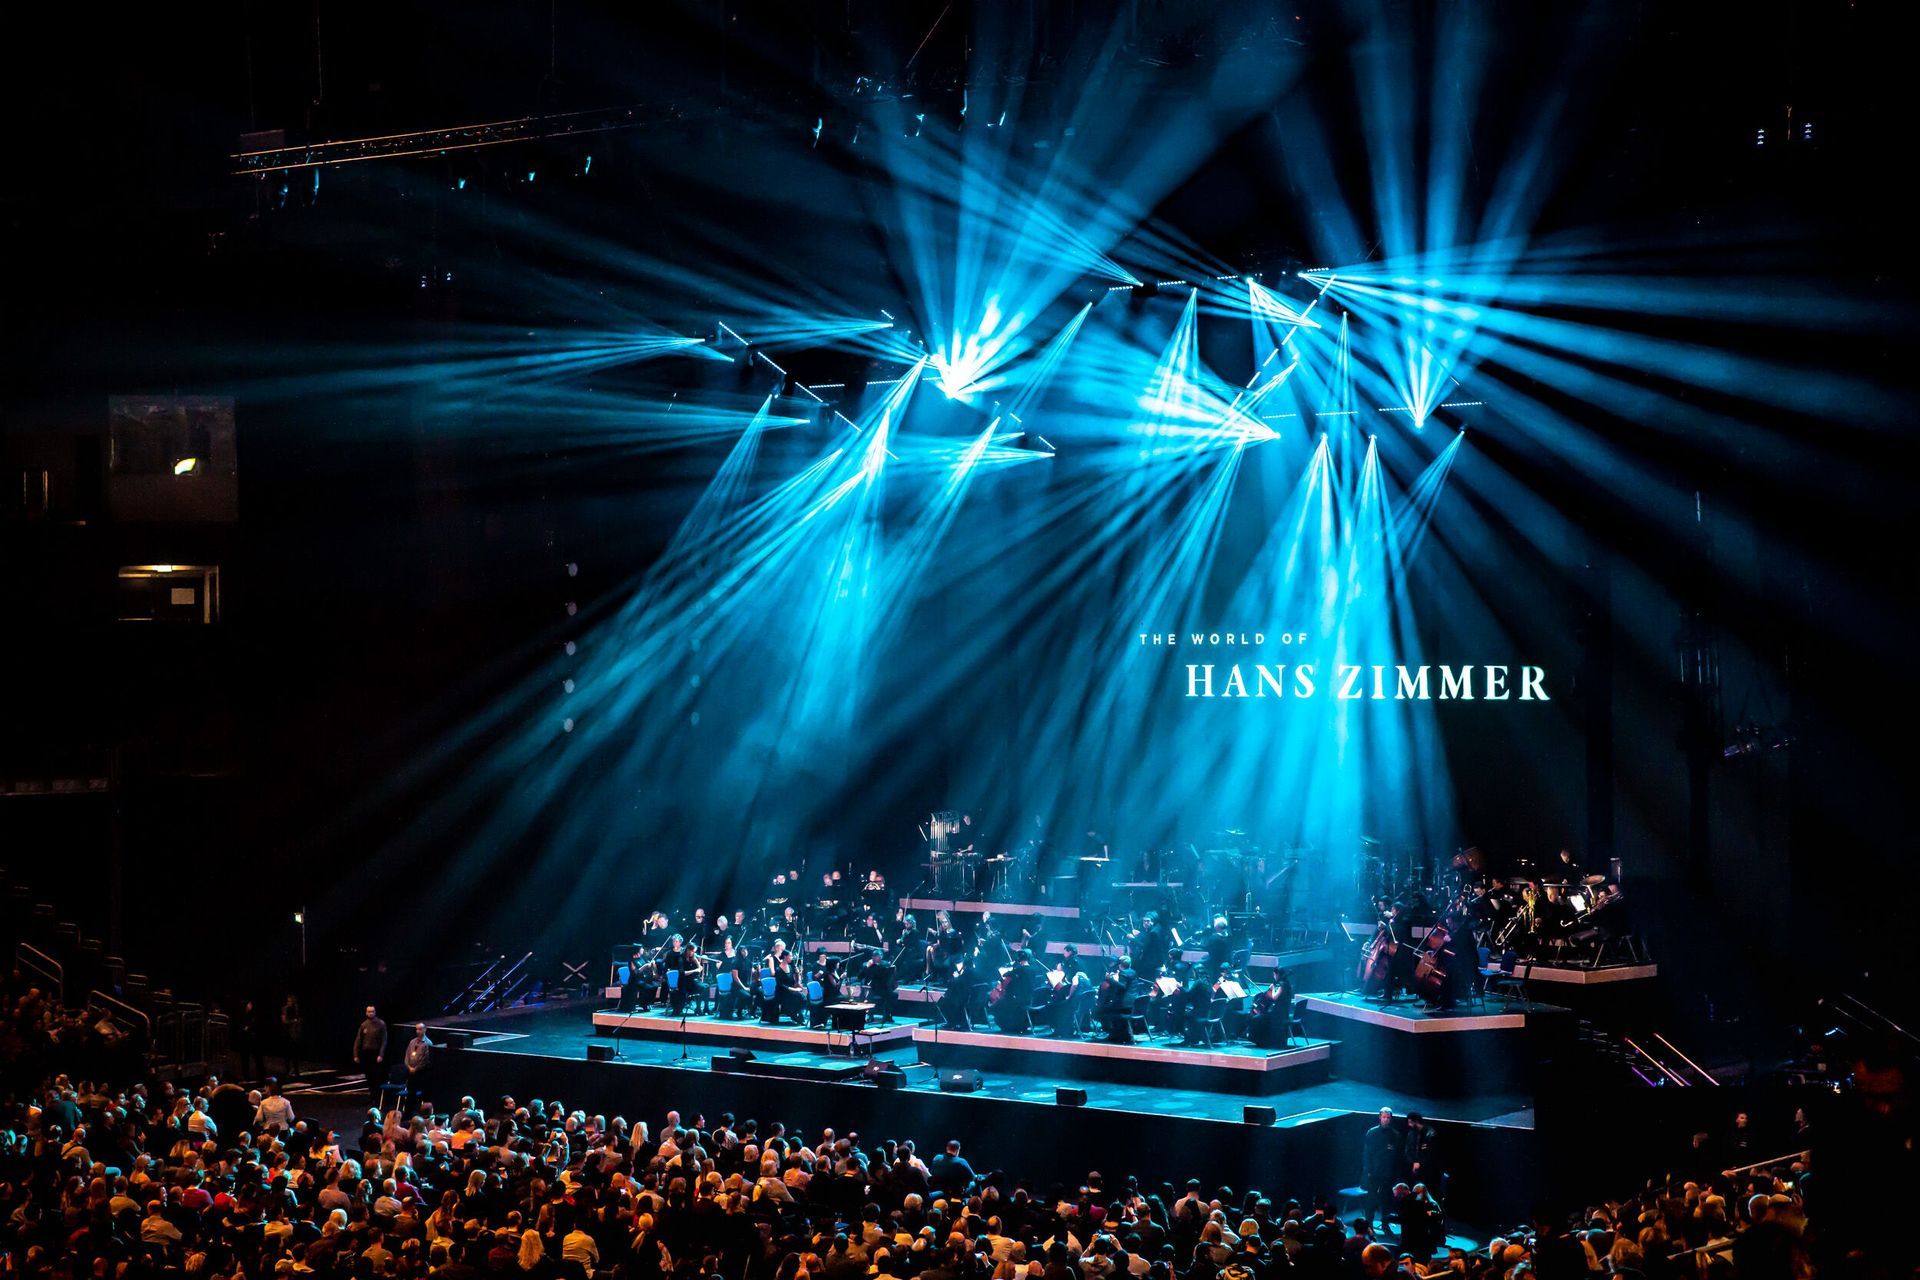 European Tour 2024
The World of Hans Zimmer
A New Dimension
FIRST SPRING DATES OF THE SUCCESSFUL SHOW ALREADY SOLD OUT!
